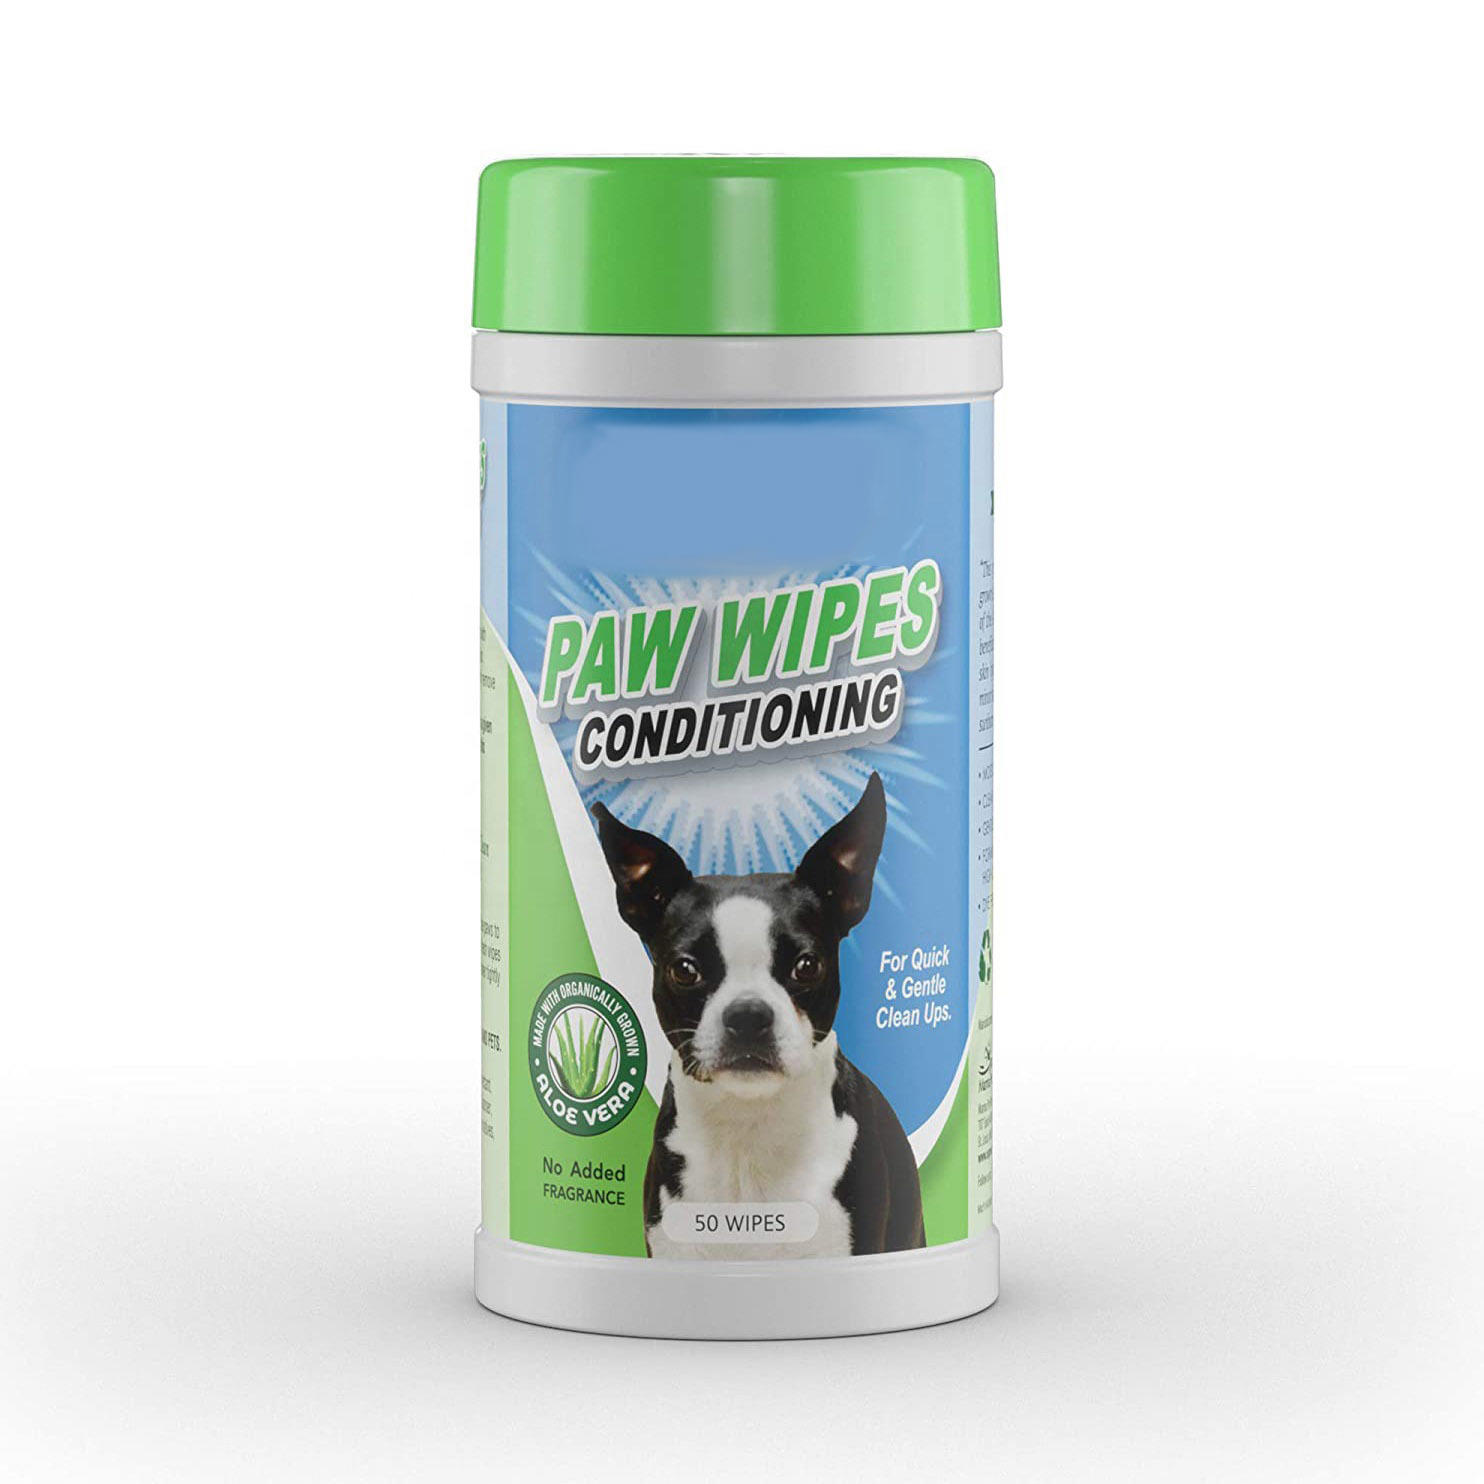 Multipurpose Pet Puppy Wipes for Grooming